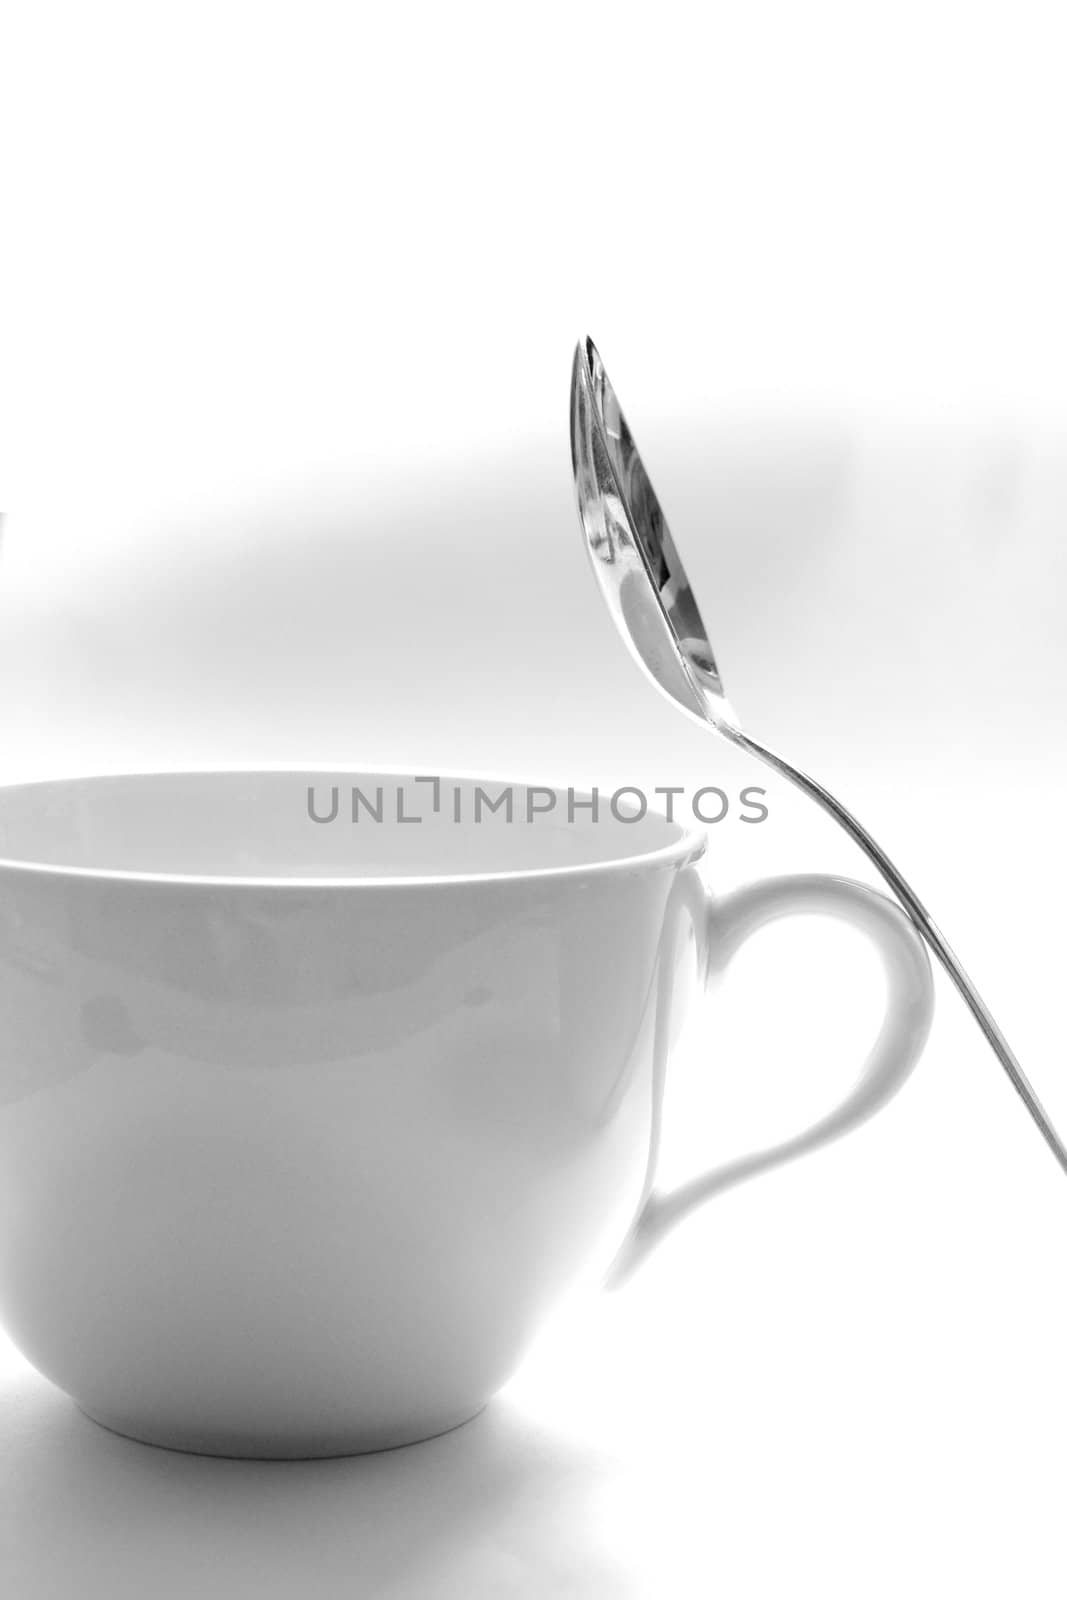 Spoon and cup by leeser